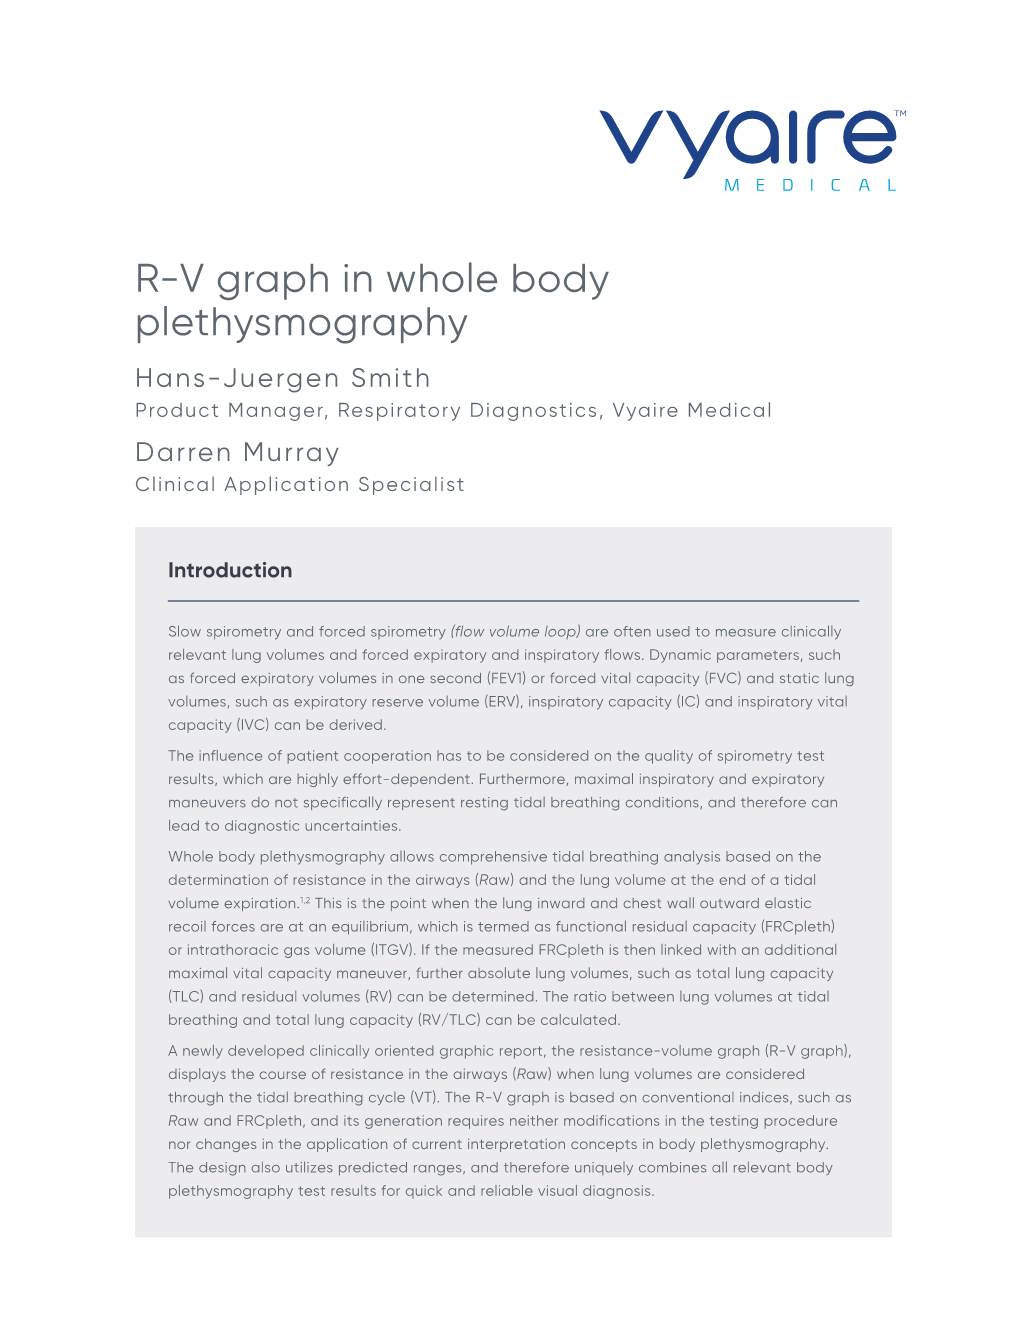 R-V Graph in Whole Body Plethysmography Download